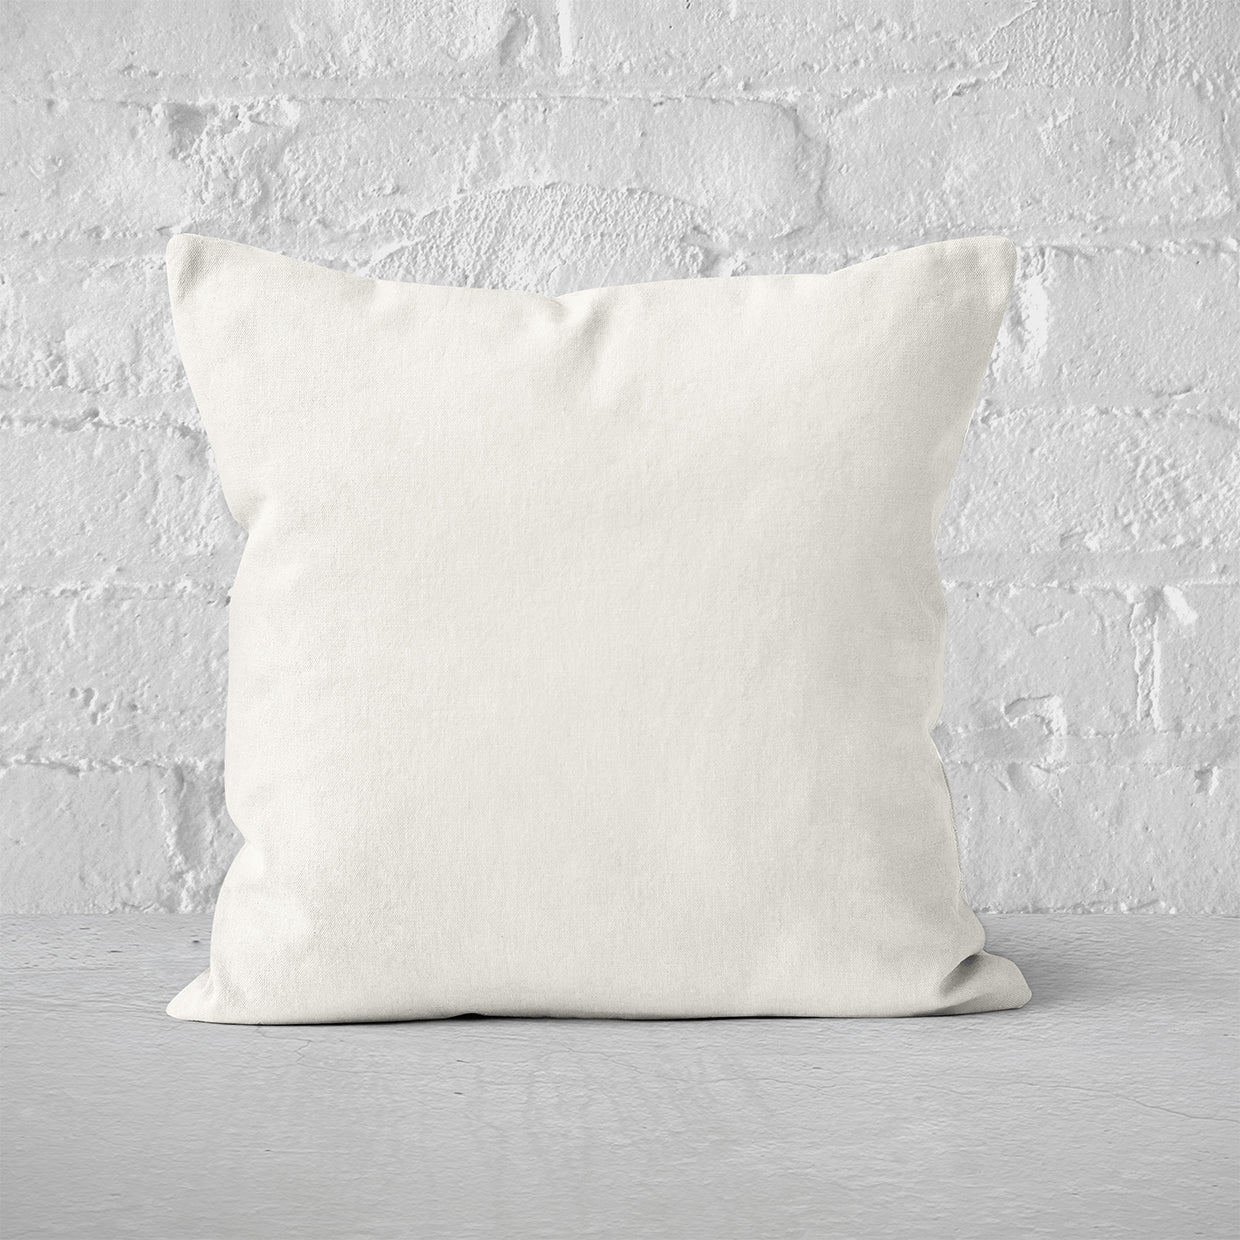 Pillow Cover Art Feature 'Solid' - Bone White - Cotton Twill